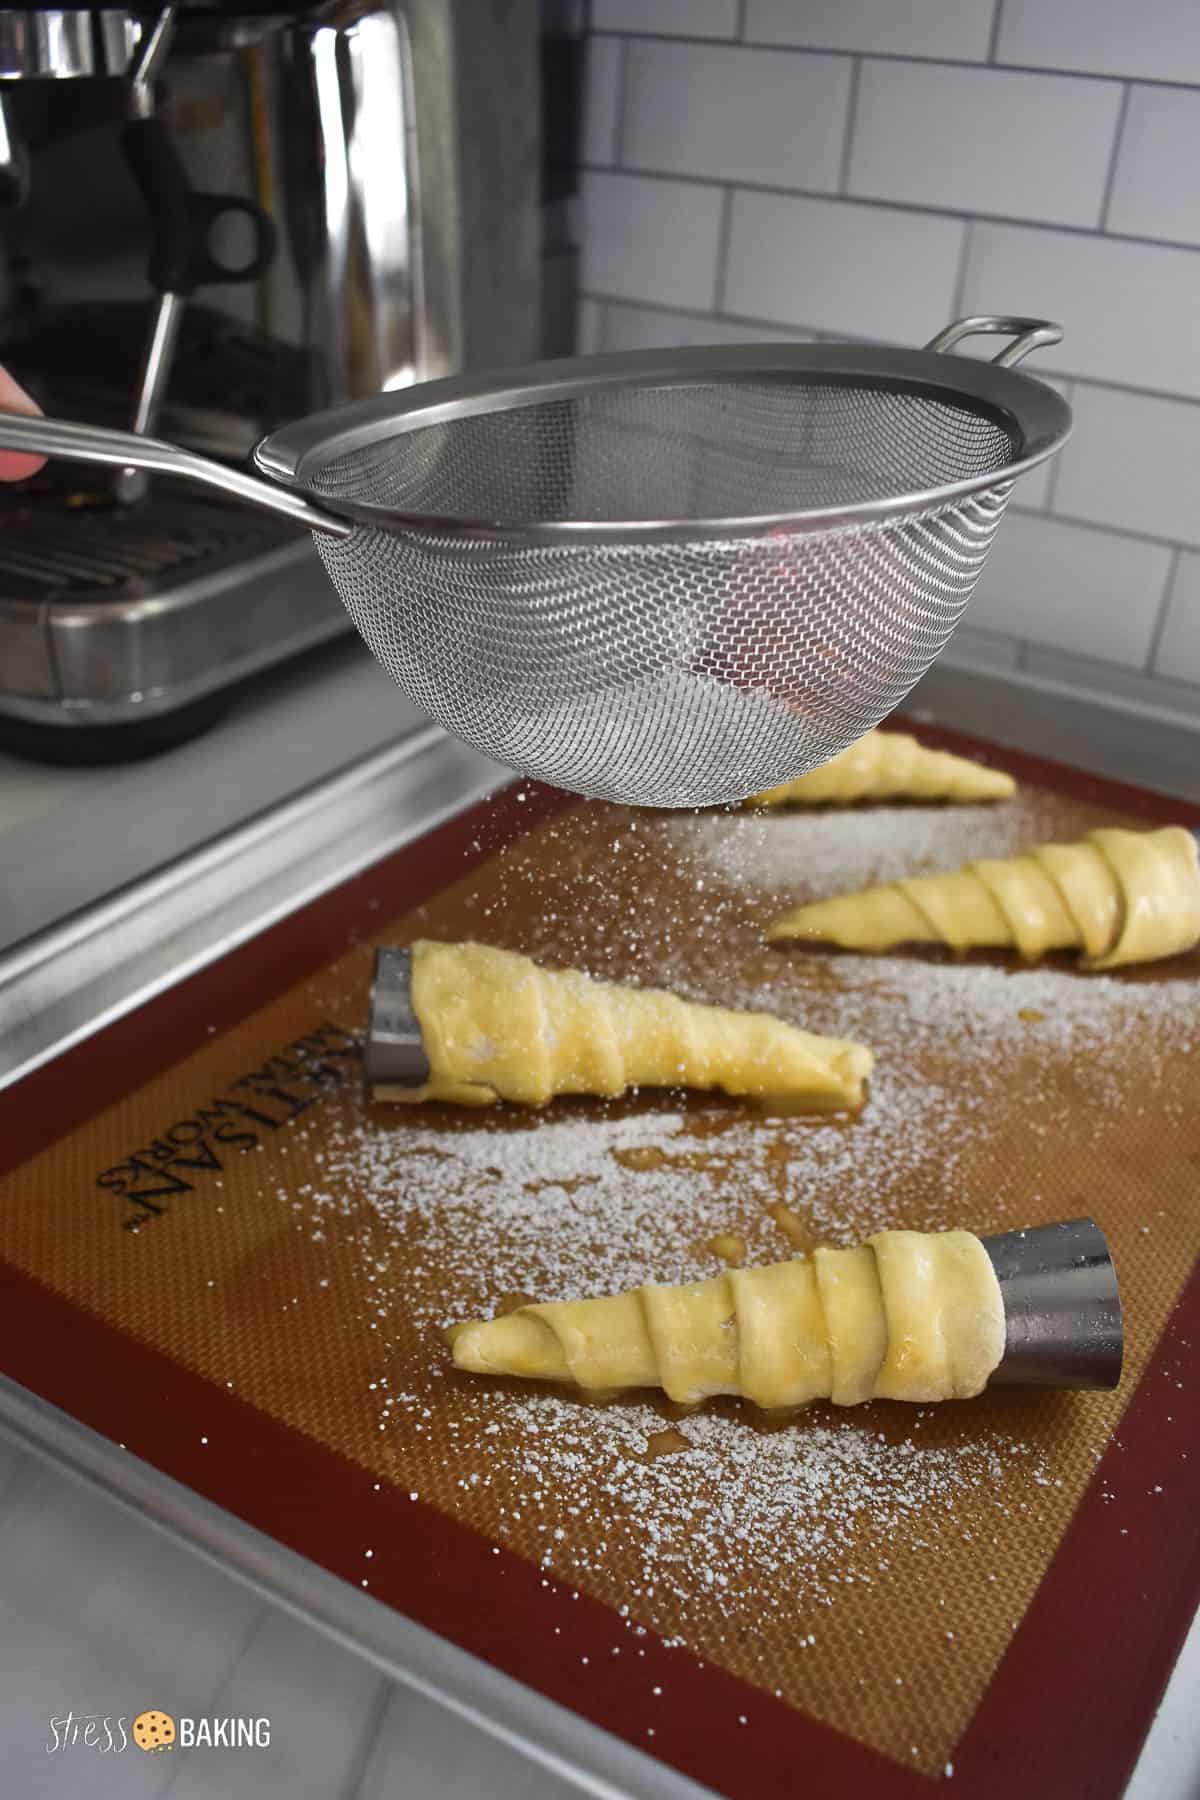 Powdered sugar being dusted on top of pastry cones with a mesh sieve